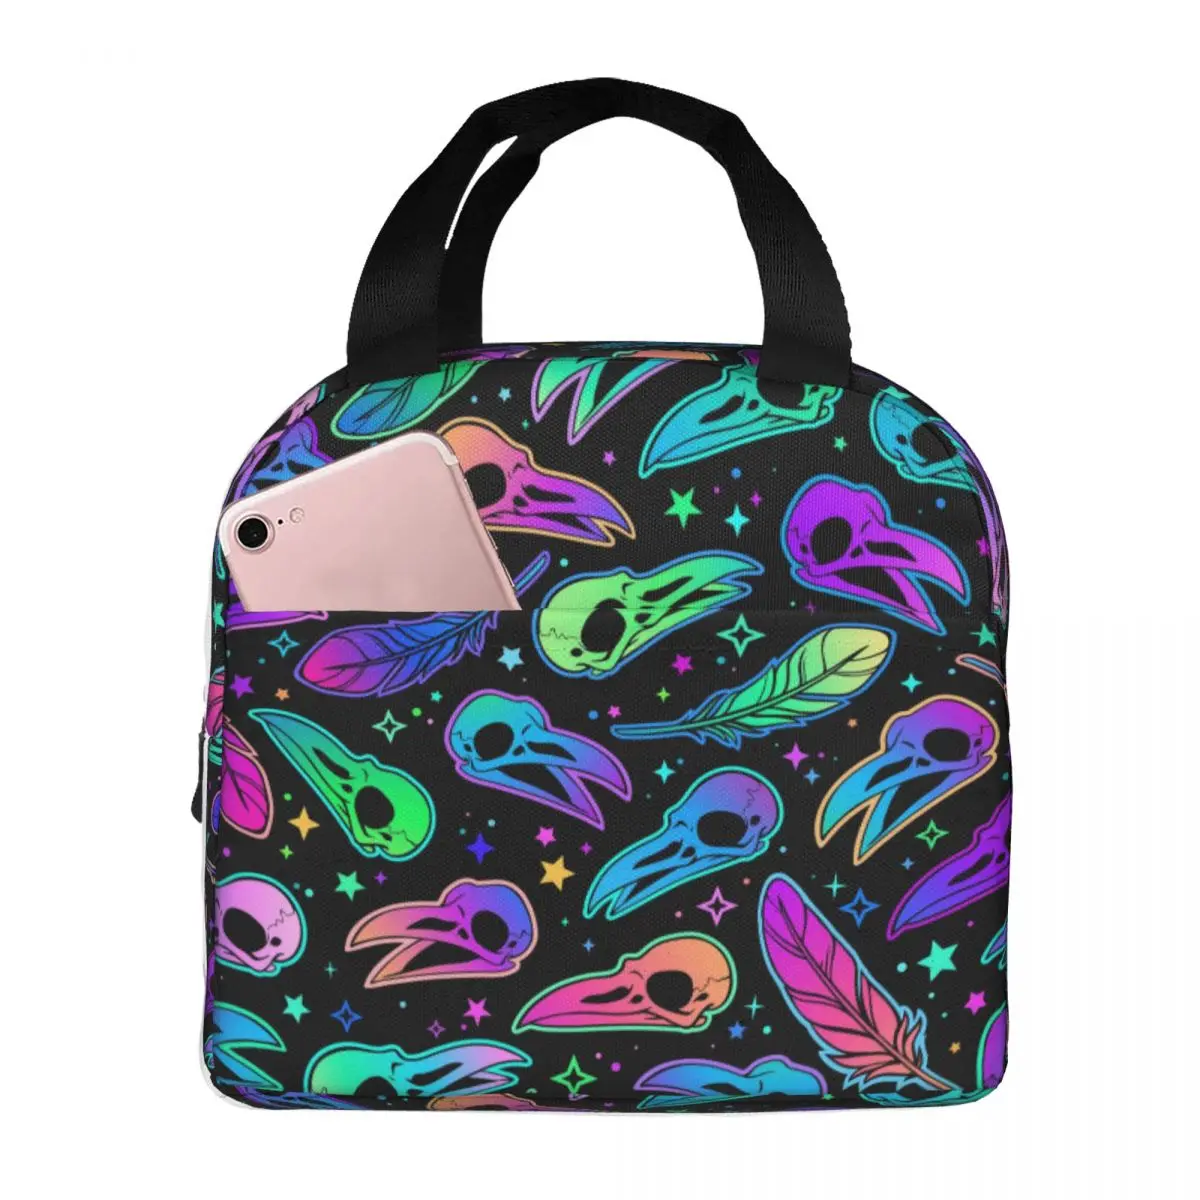 

Bird Skulls And Feathers Cooler Bag Portable Zipper Thermal Lunch Bag Convenient Lunch Box Tote Food Bag